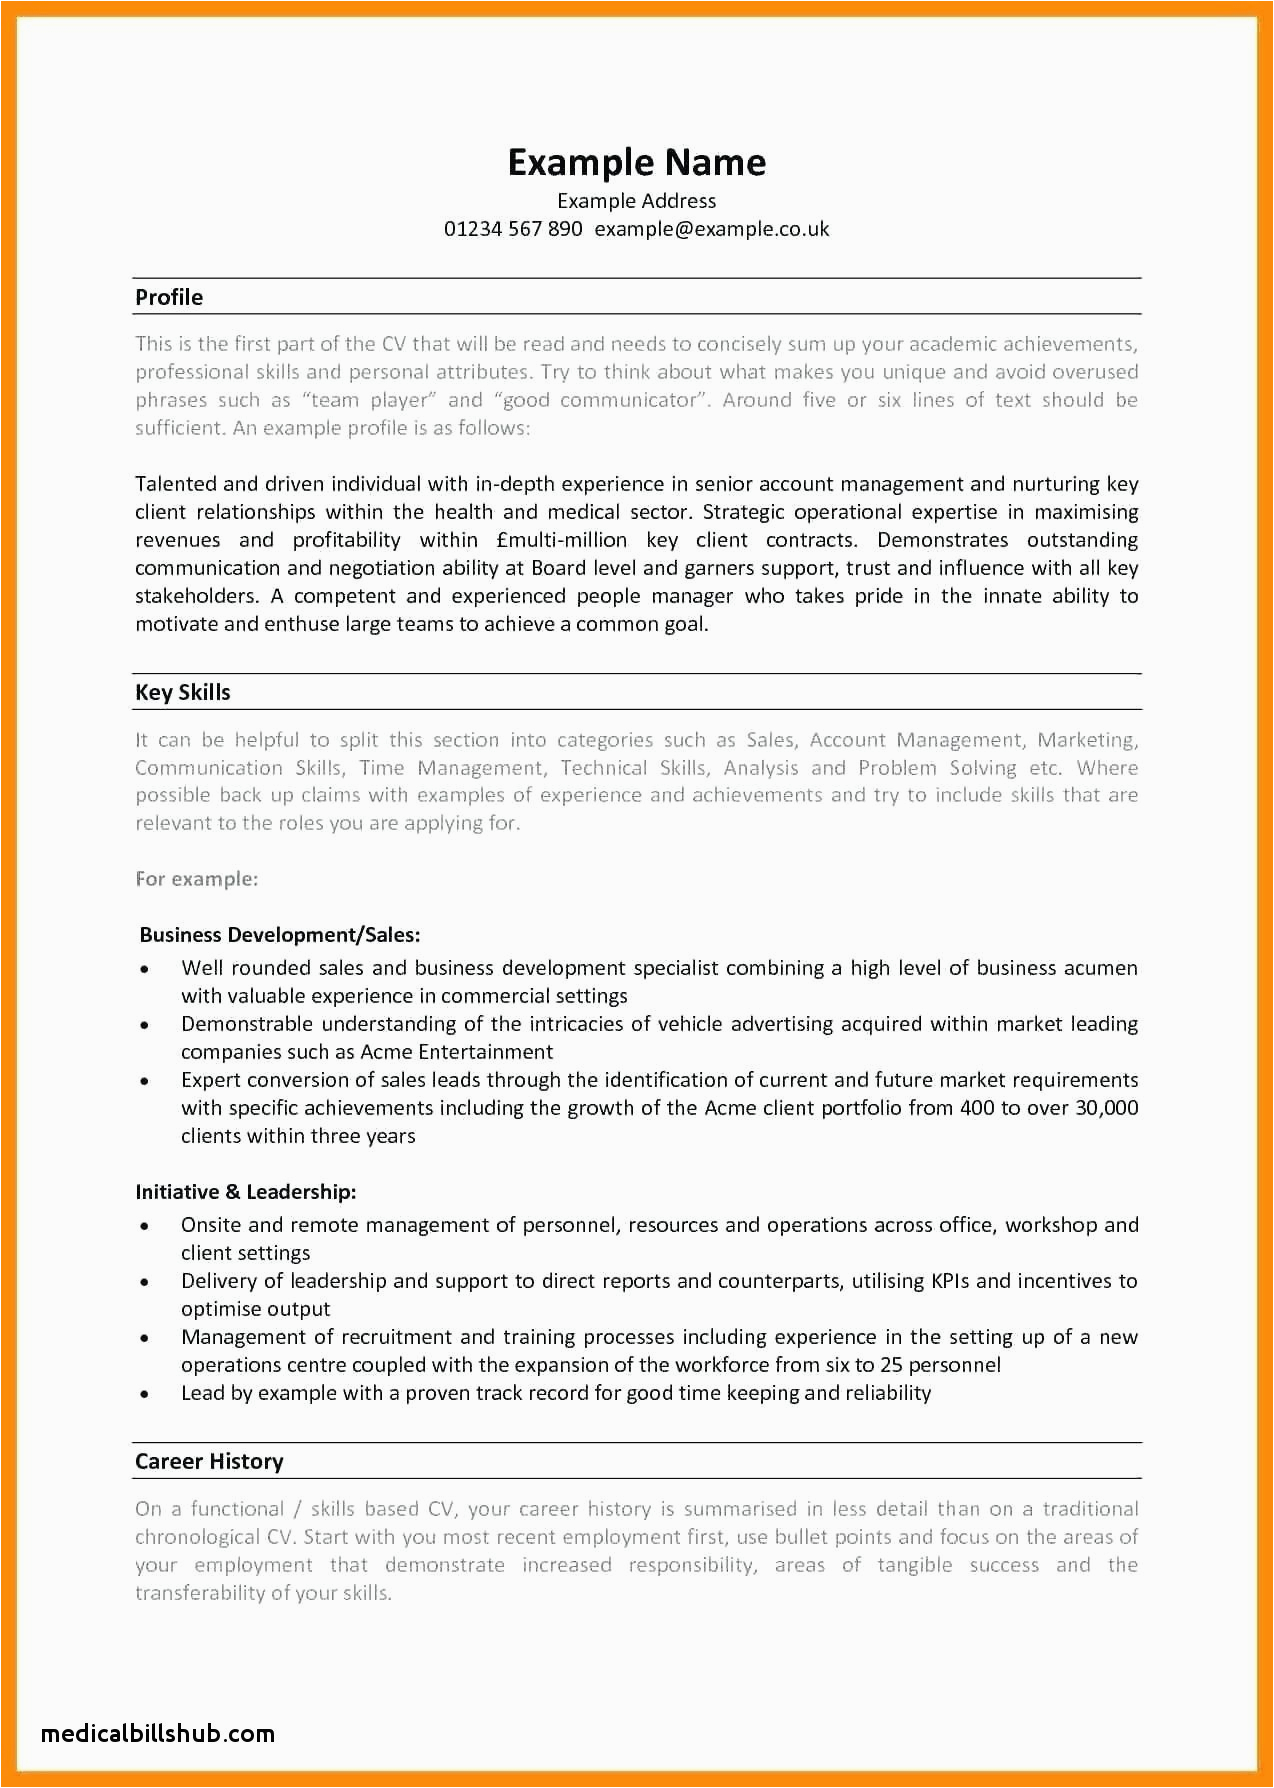 Resume Template for Mothers Returning to Work 13 Sample Resume Stay at Home Mom Returning to Work